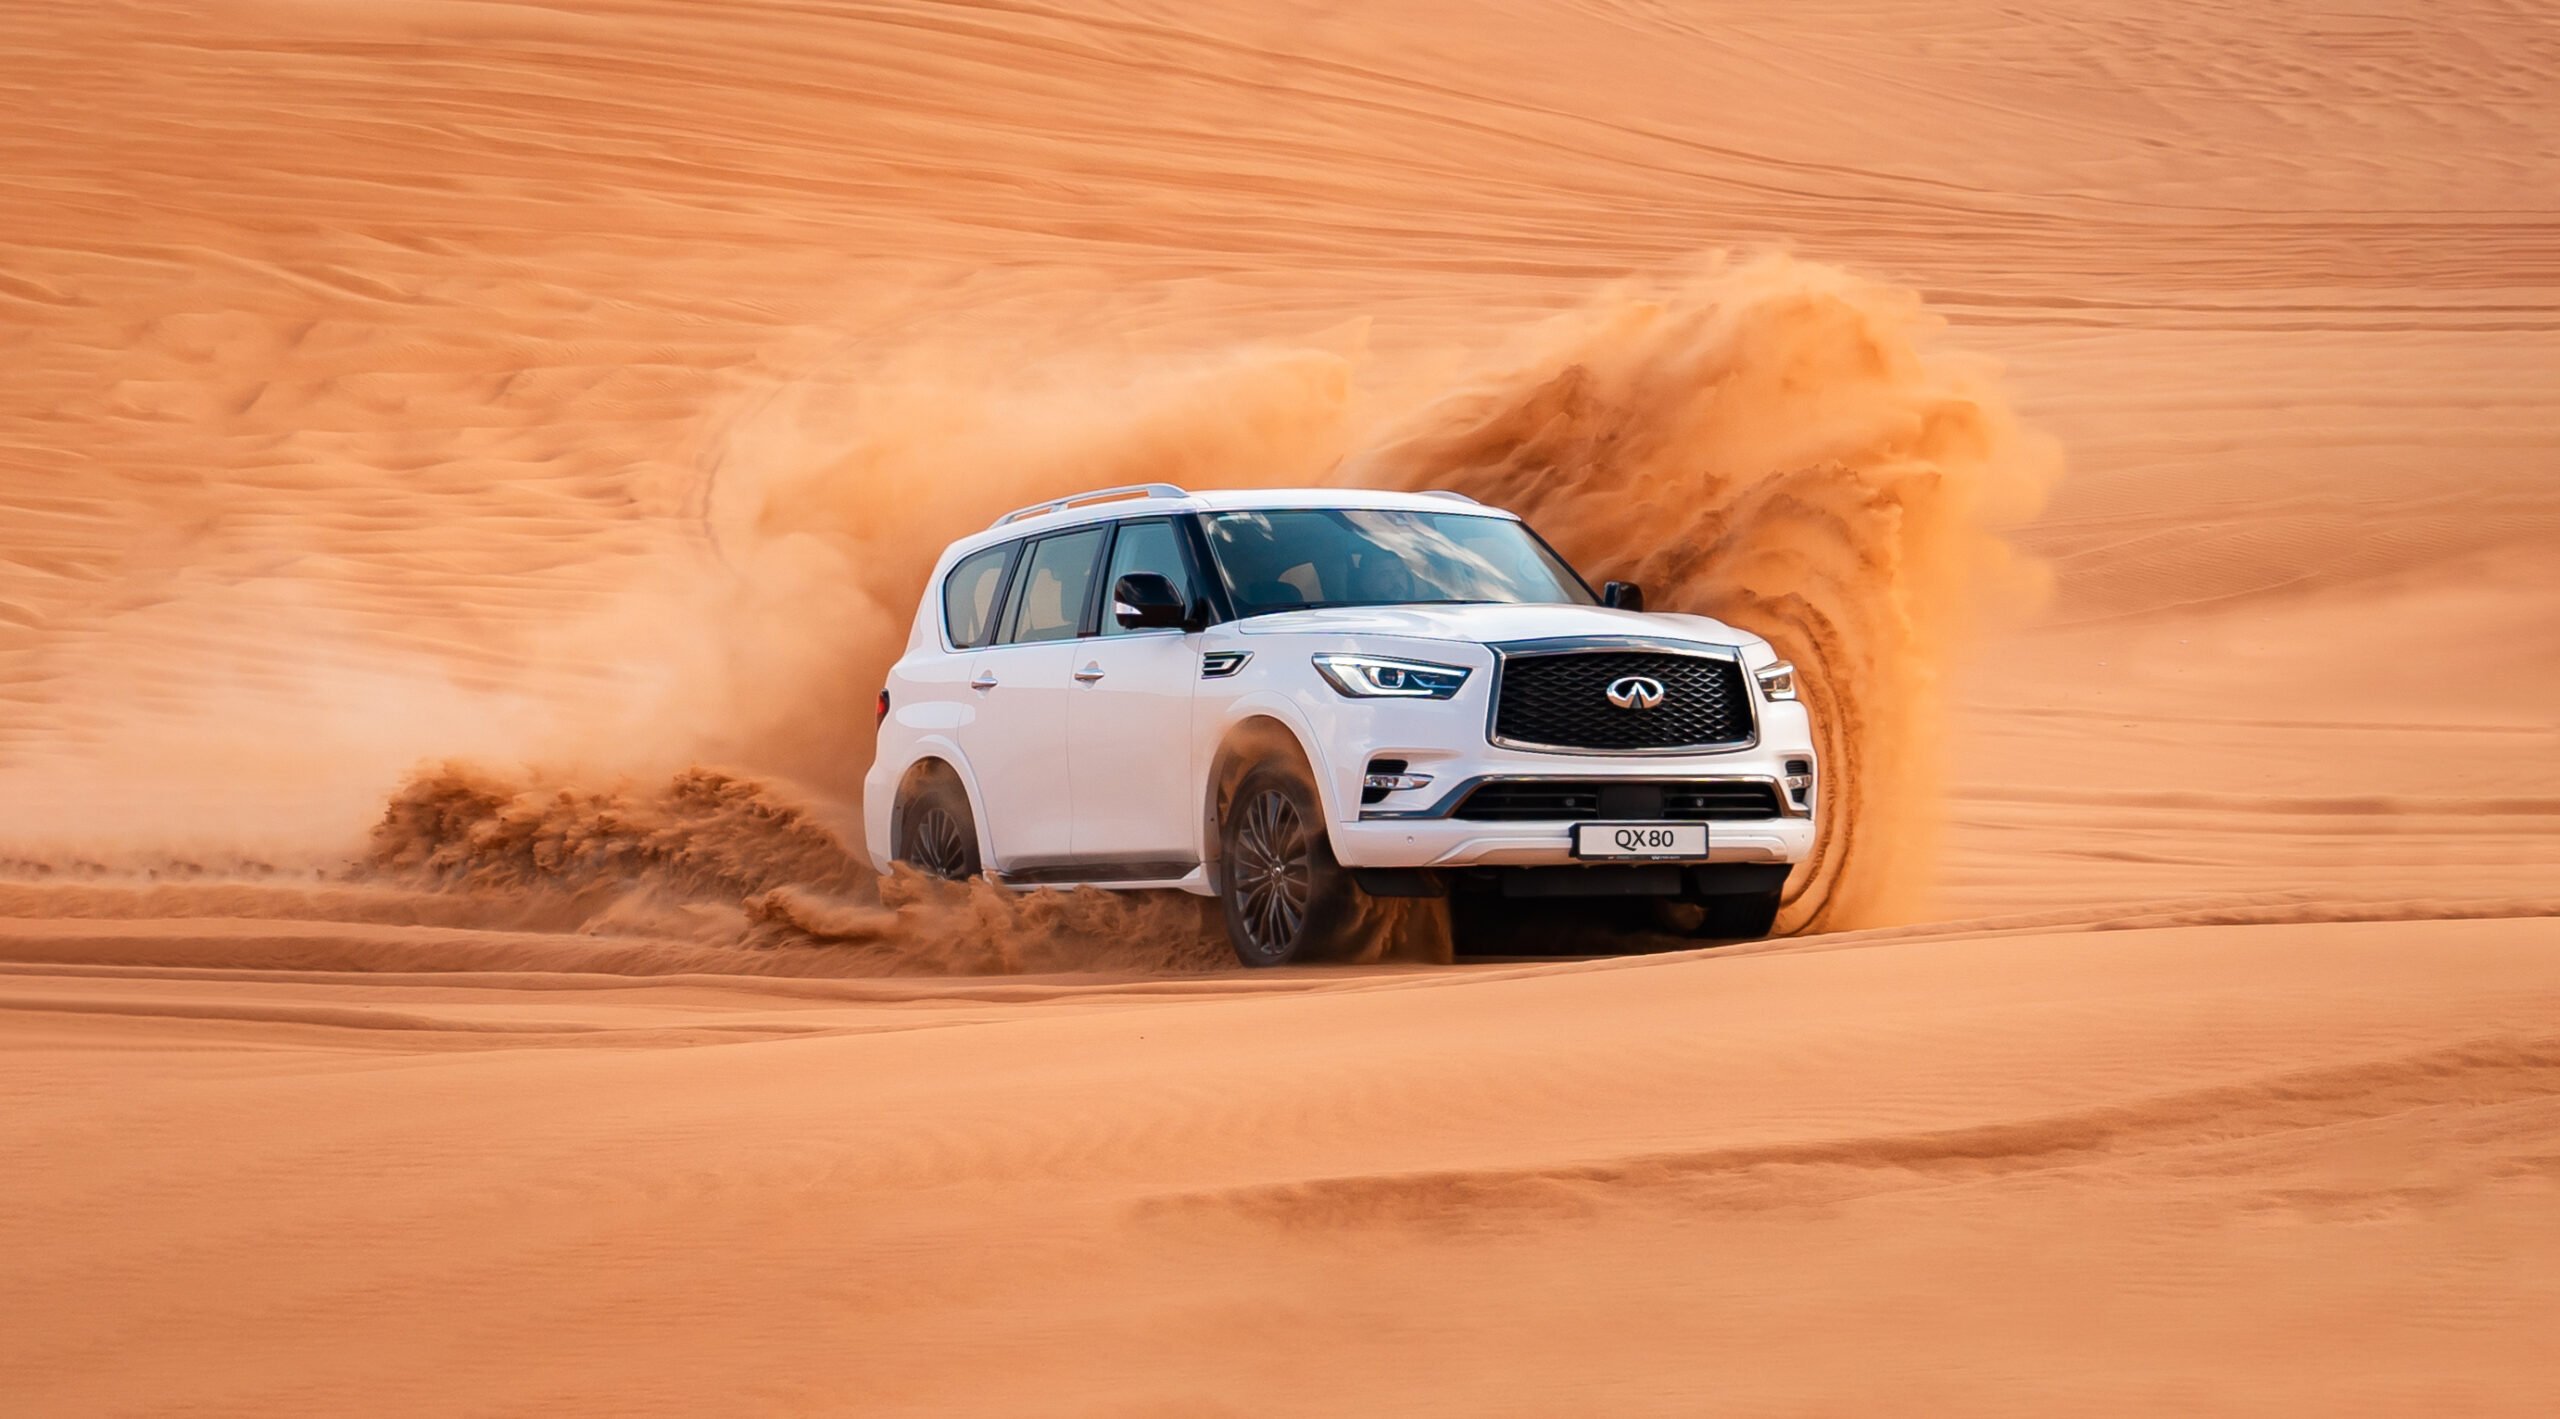 INFINITI QX80 Trade-in Campaign launched by Arabian Automobiles